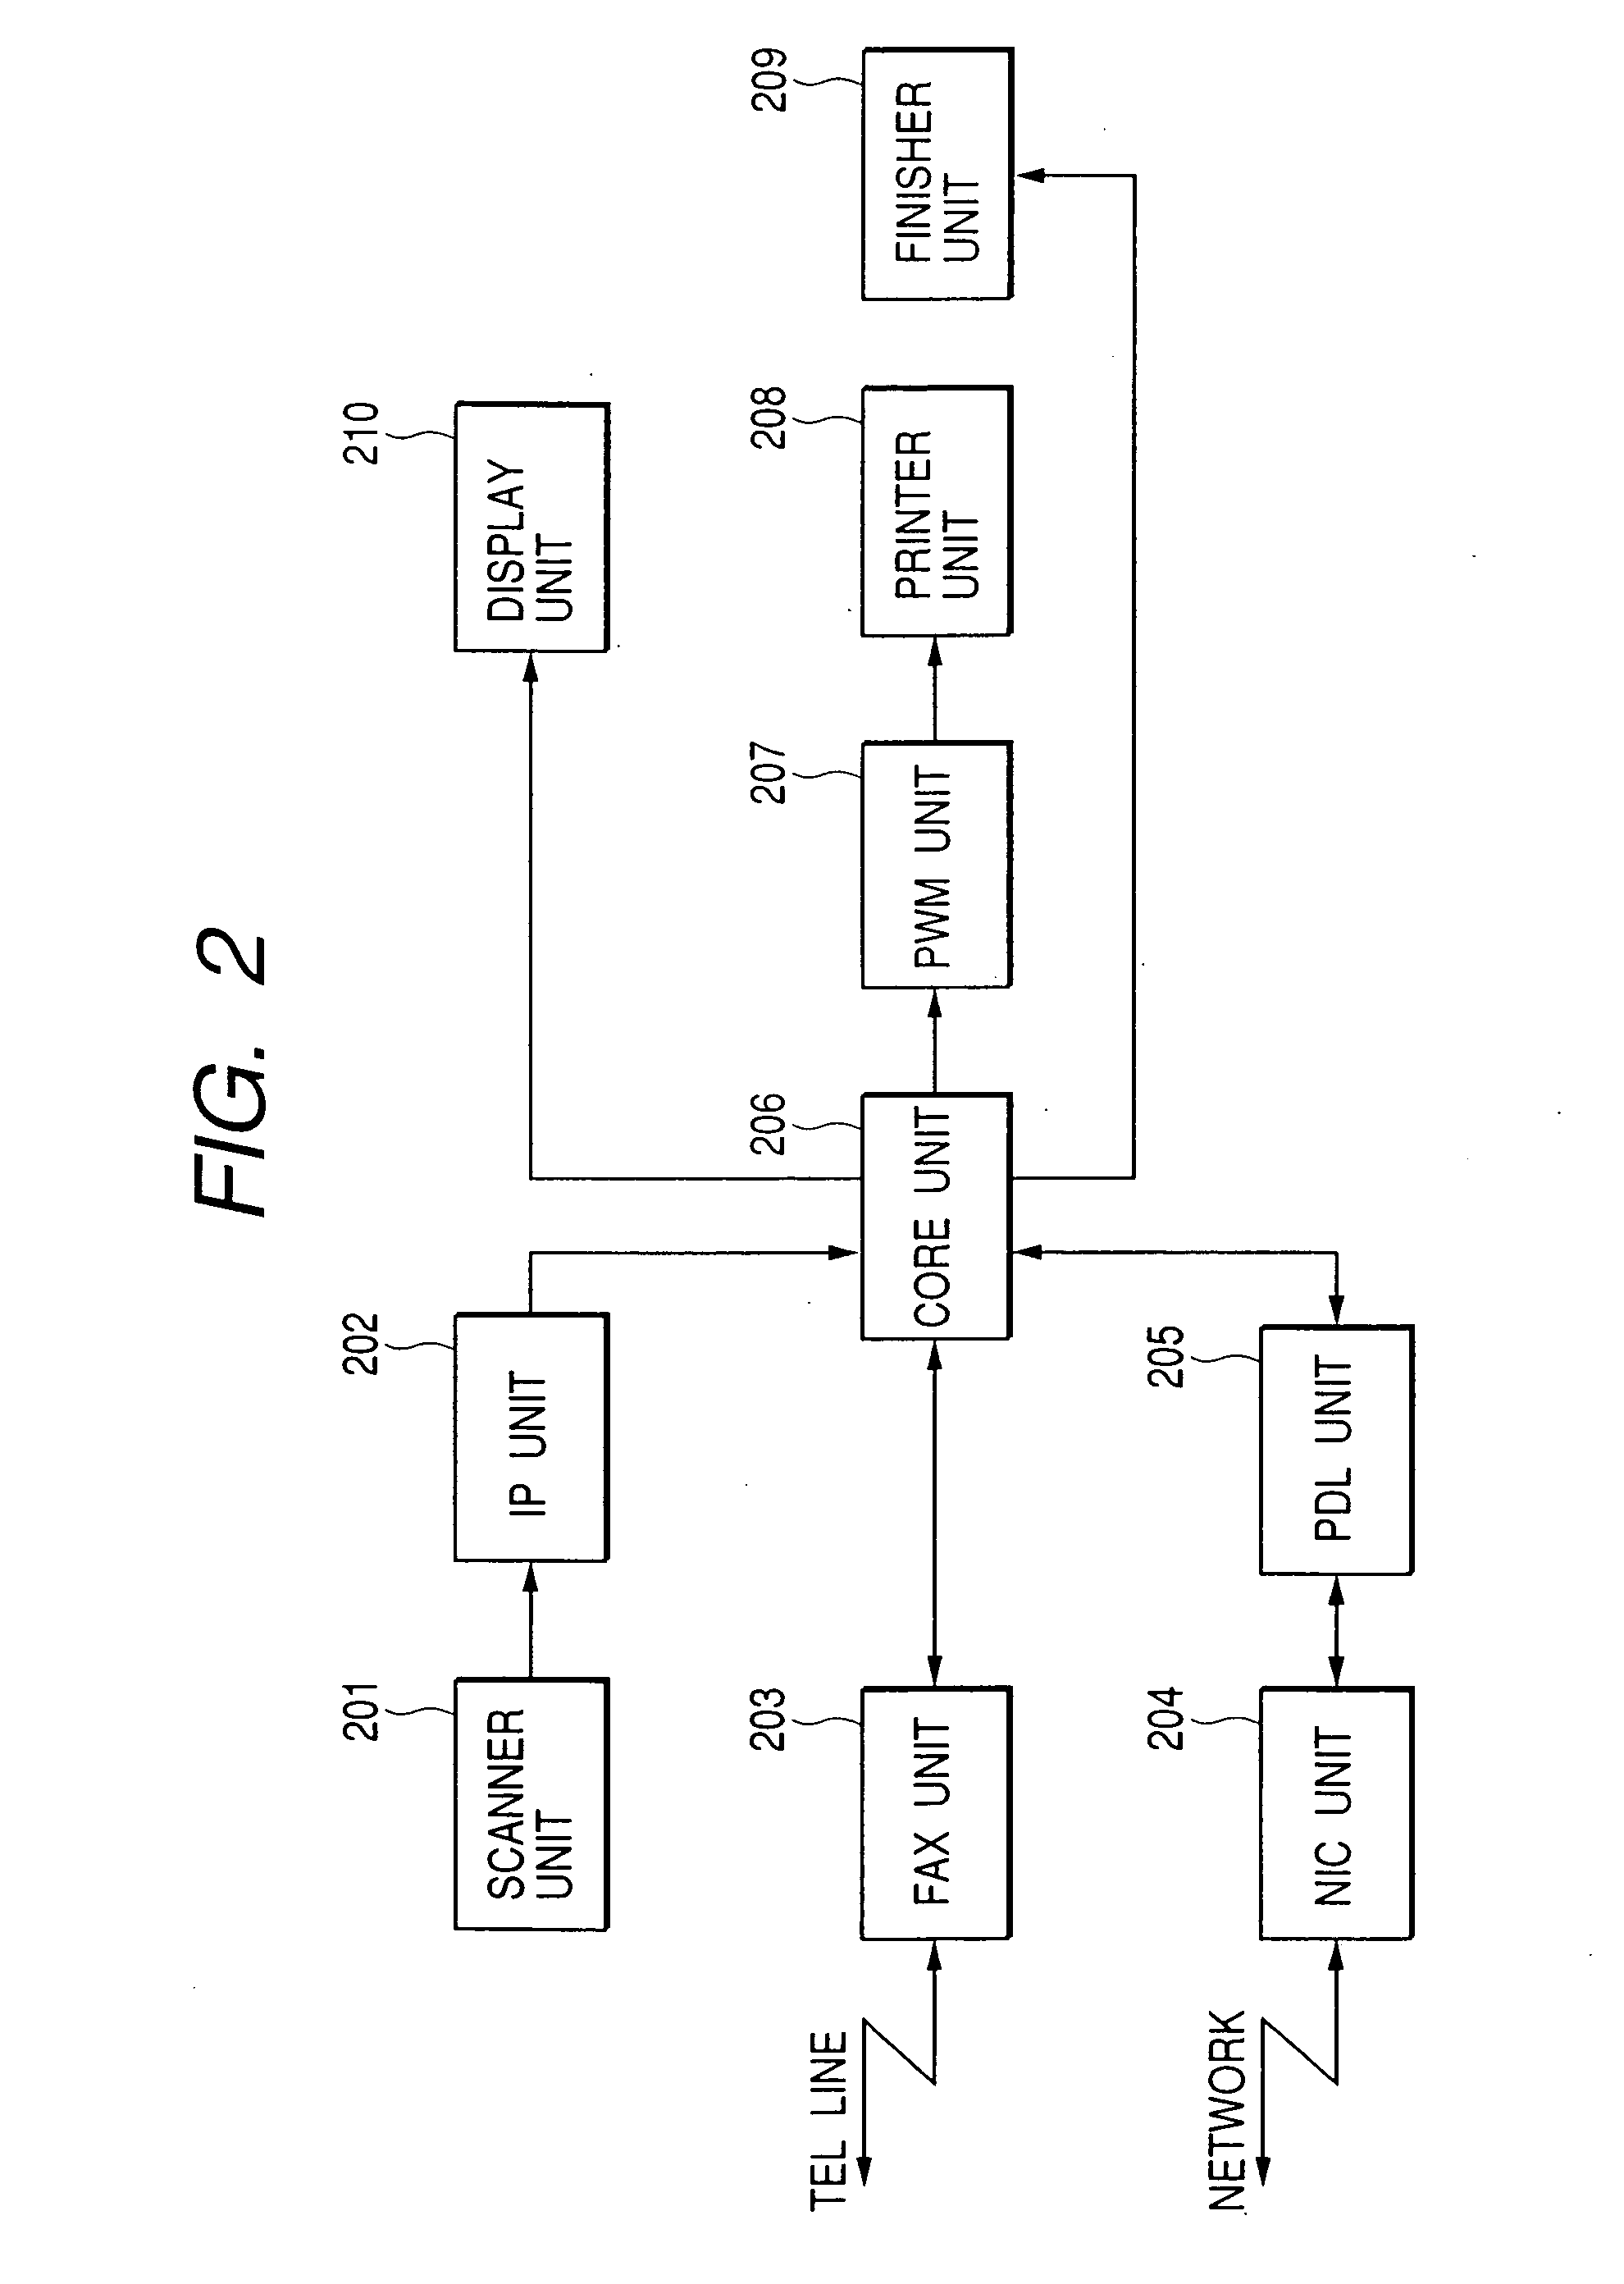 Image formation system